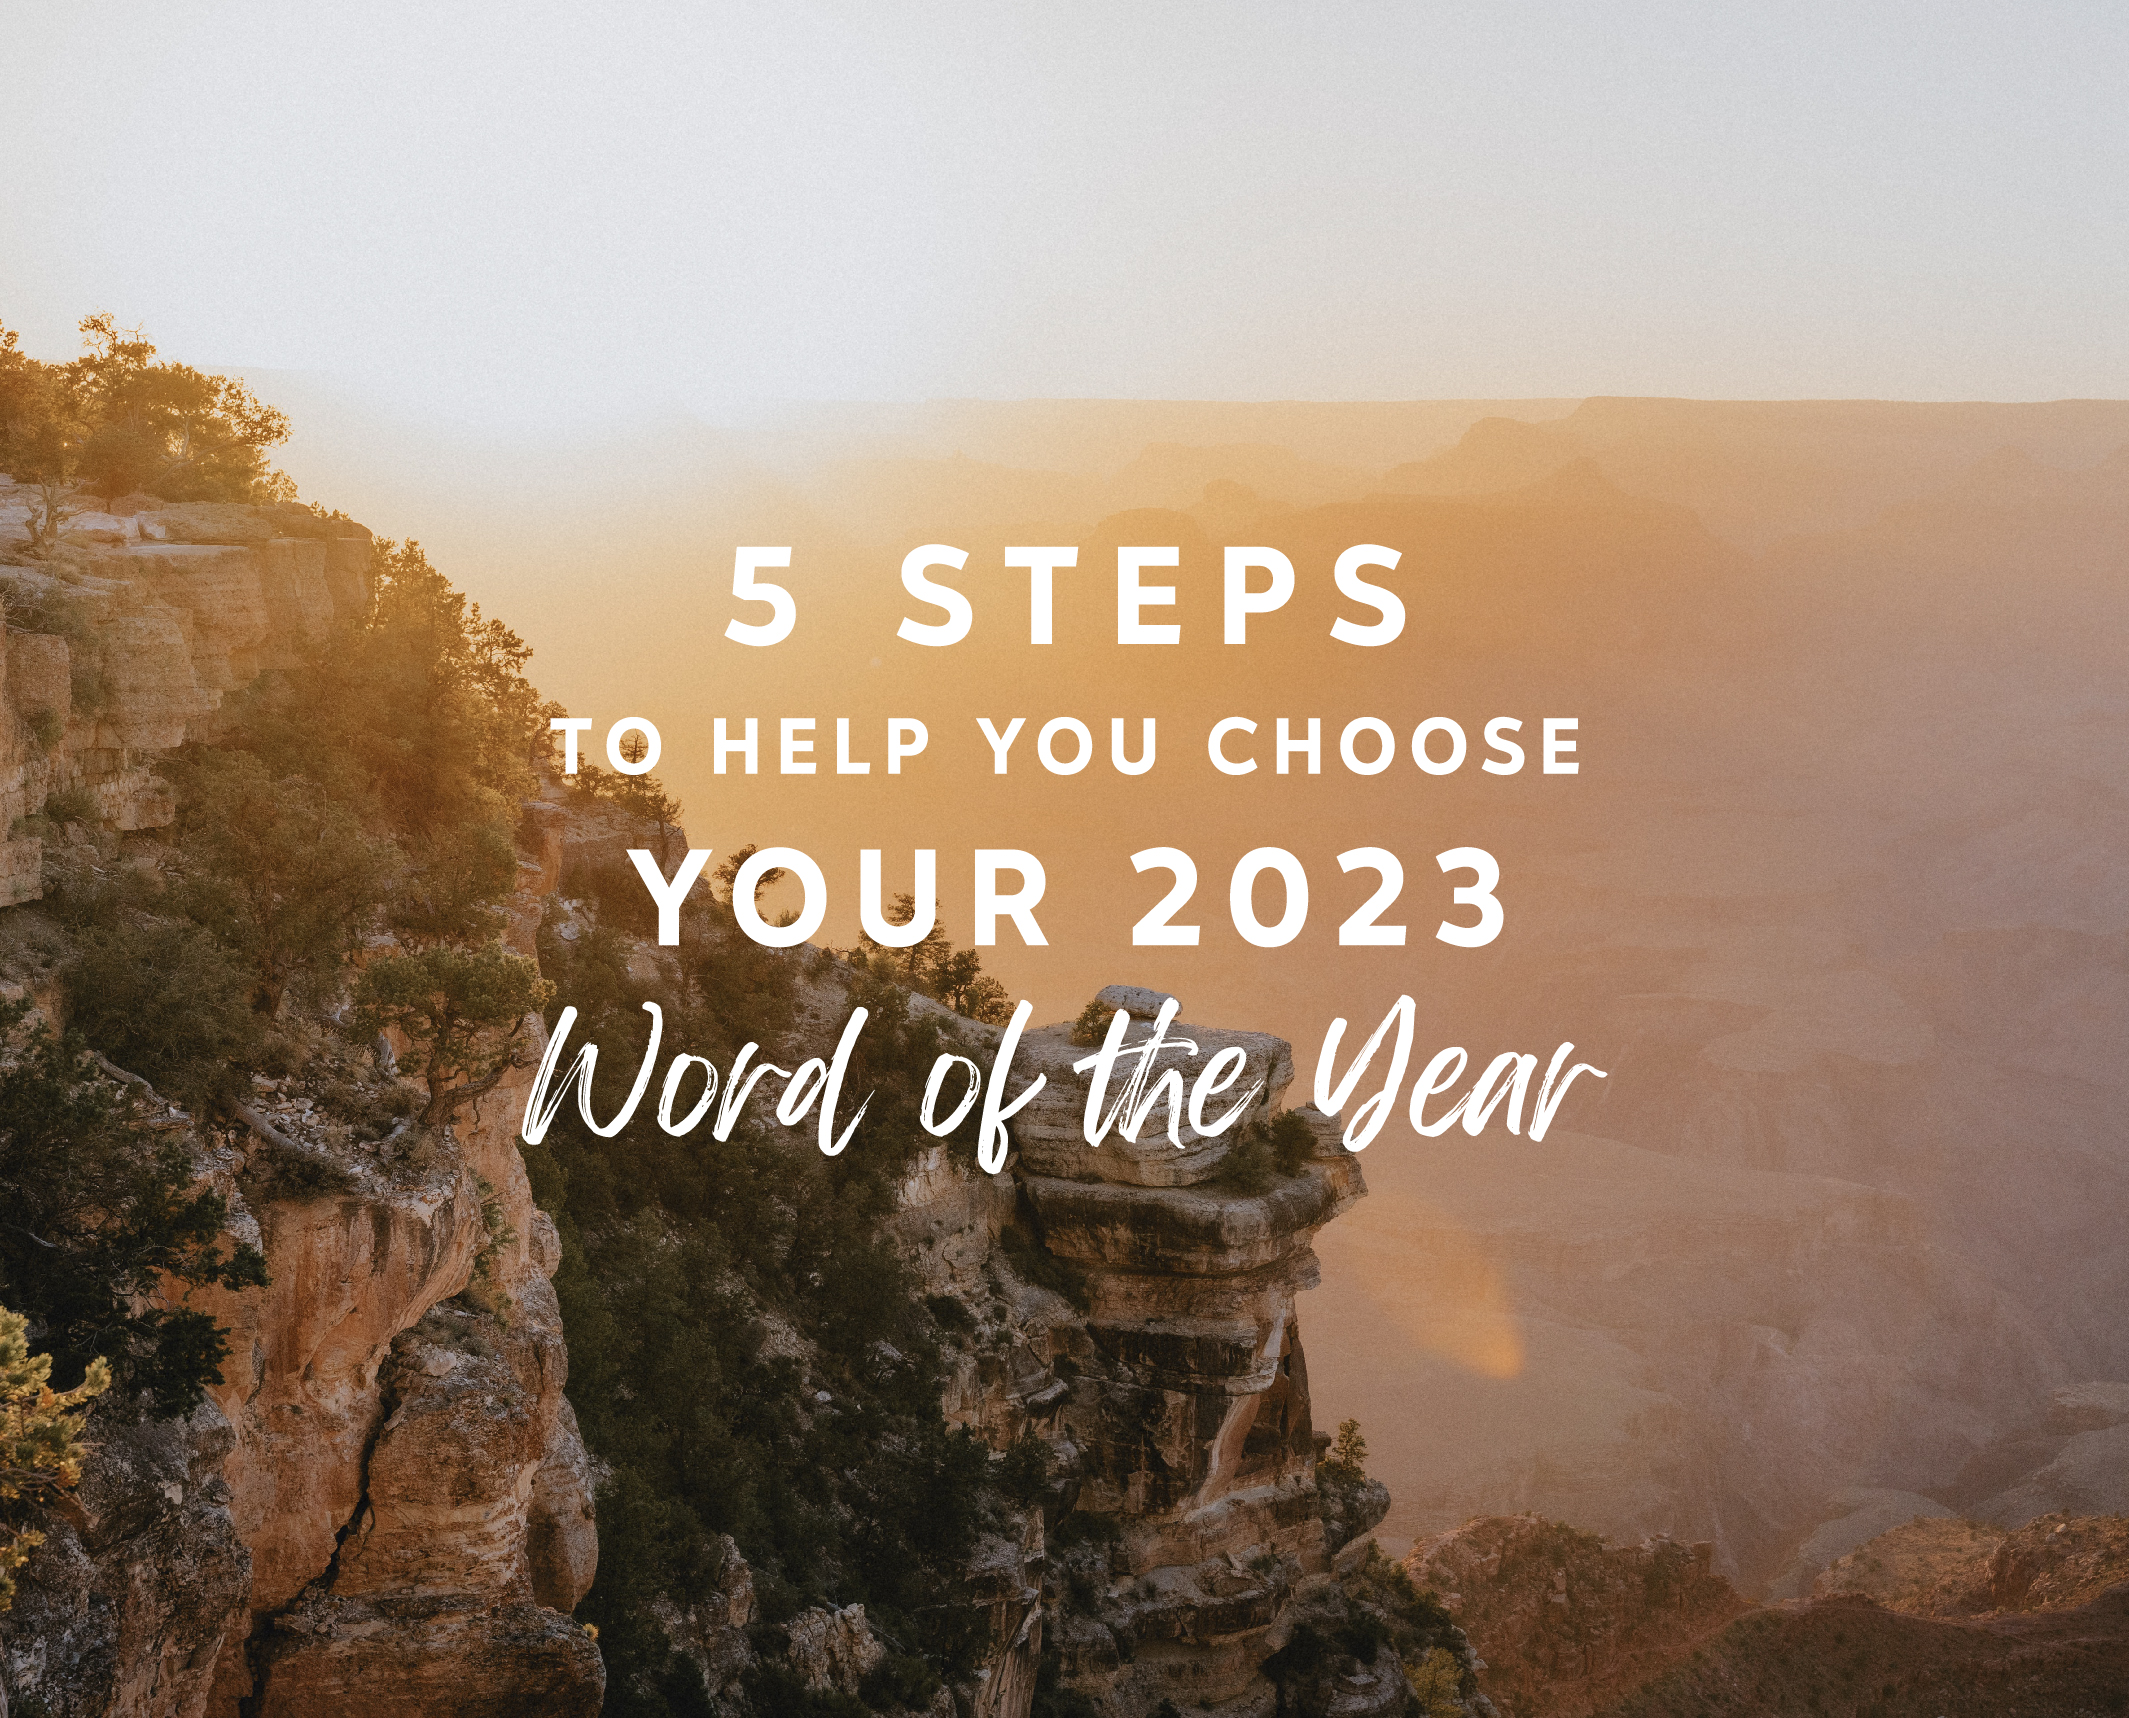 Find Your Focus: 5 Steps to Your Best Year Ever! (Updated Edition